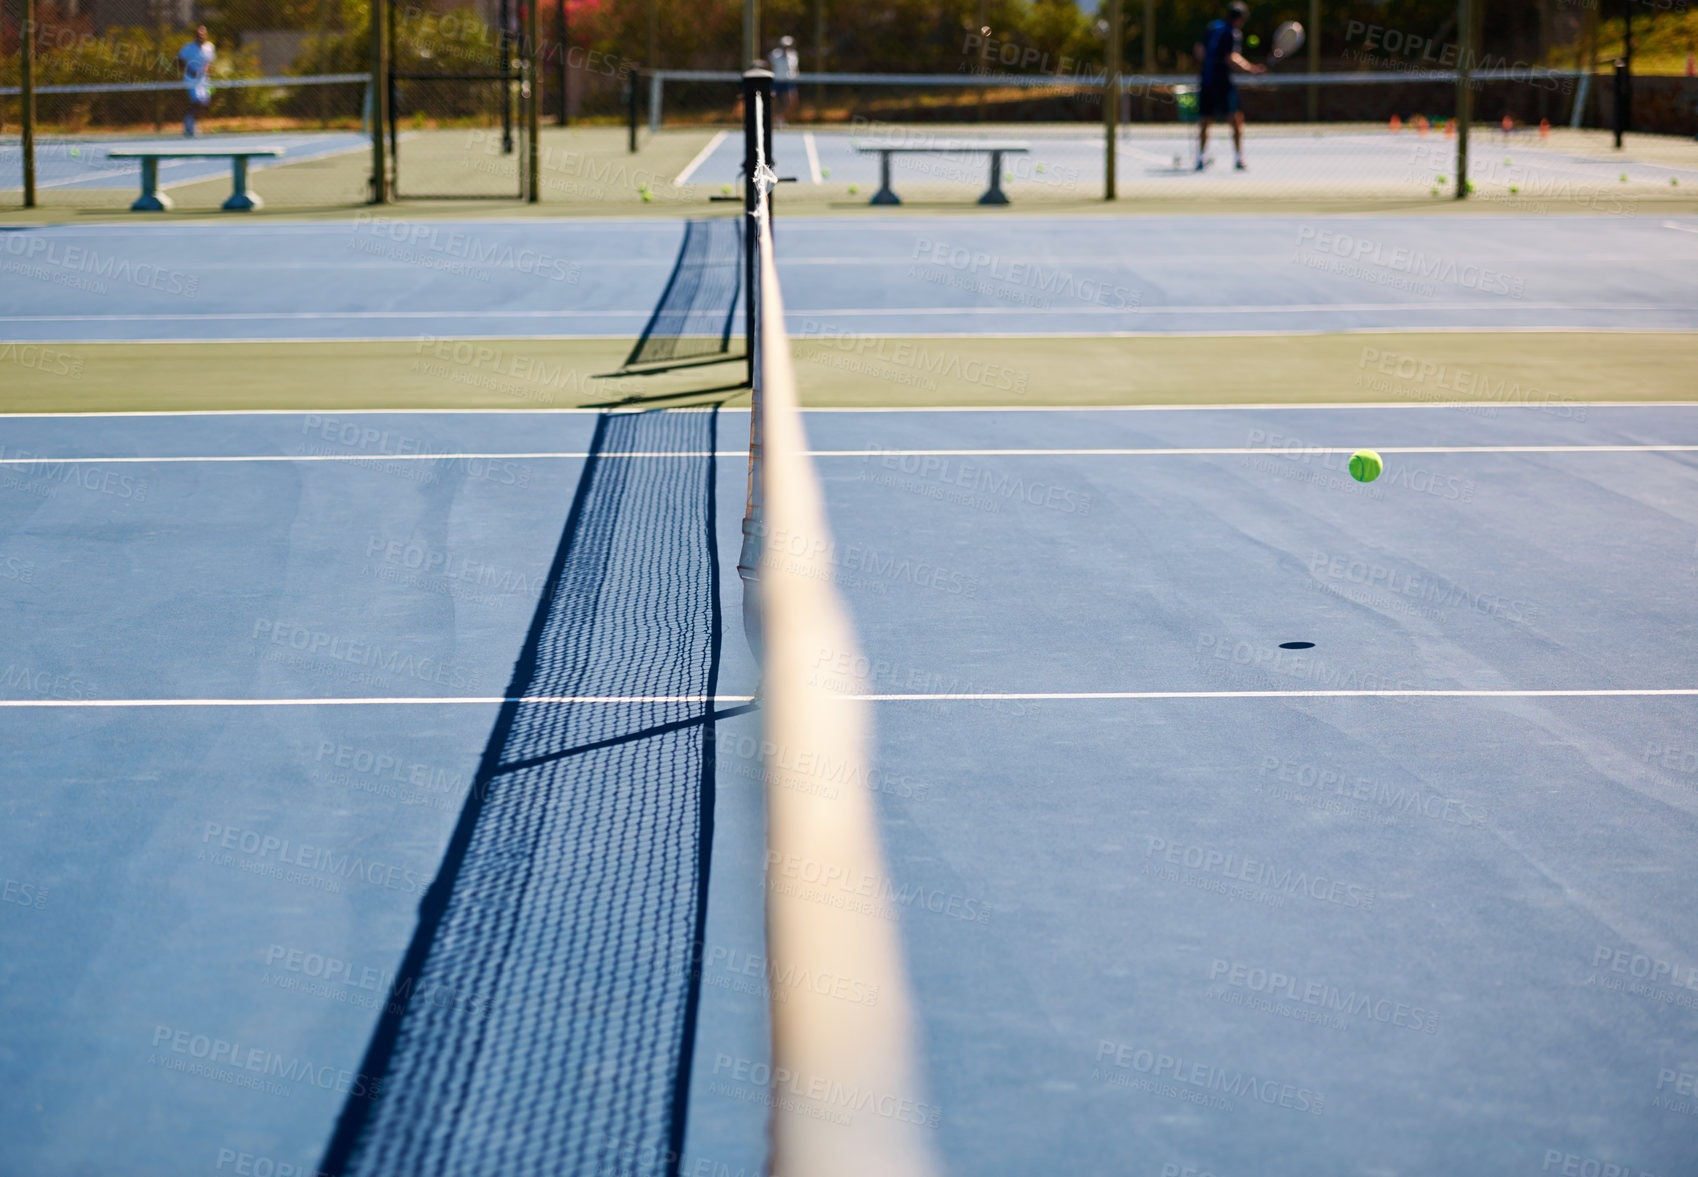 Buy stock photo A tennis court